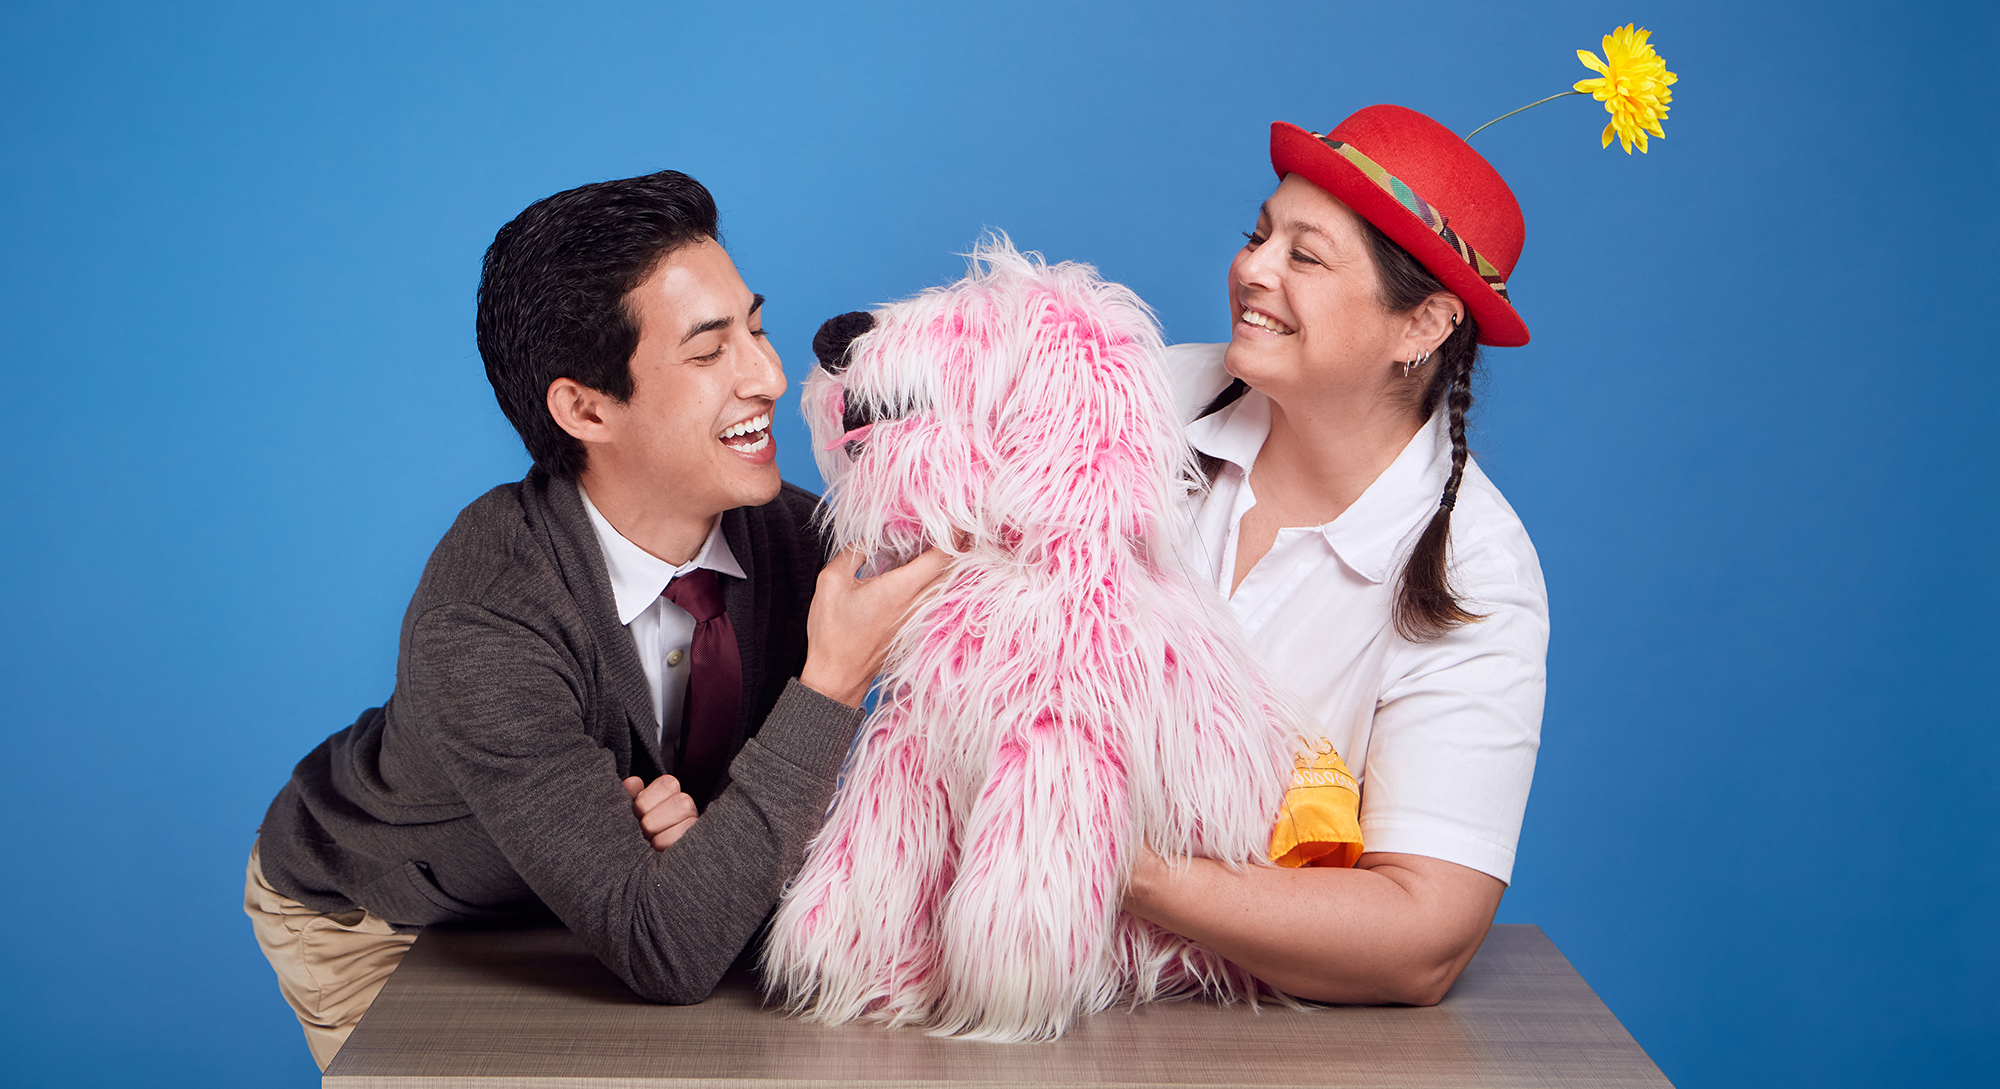 Photo of Flurffy the pink dog puppet with a smiling man on his left and a smiling woman on his right. The man wears a gray cardigan, white shirt, and dark red tie. The woman wears a white shirt and a red hat with a yellow flower on top.